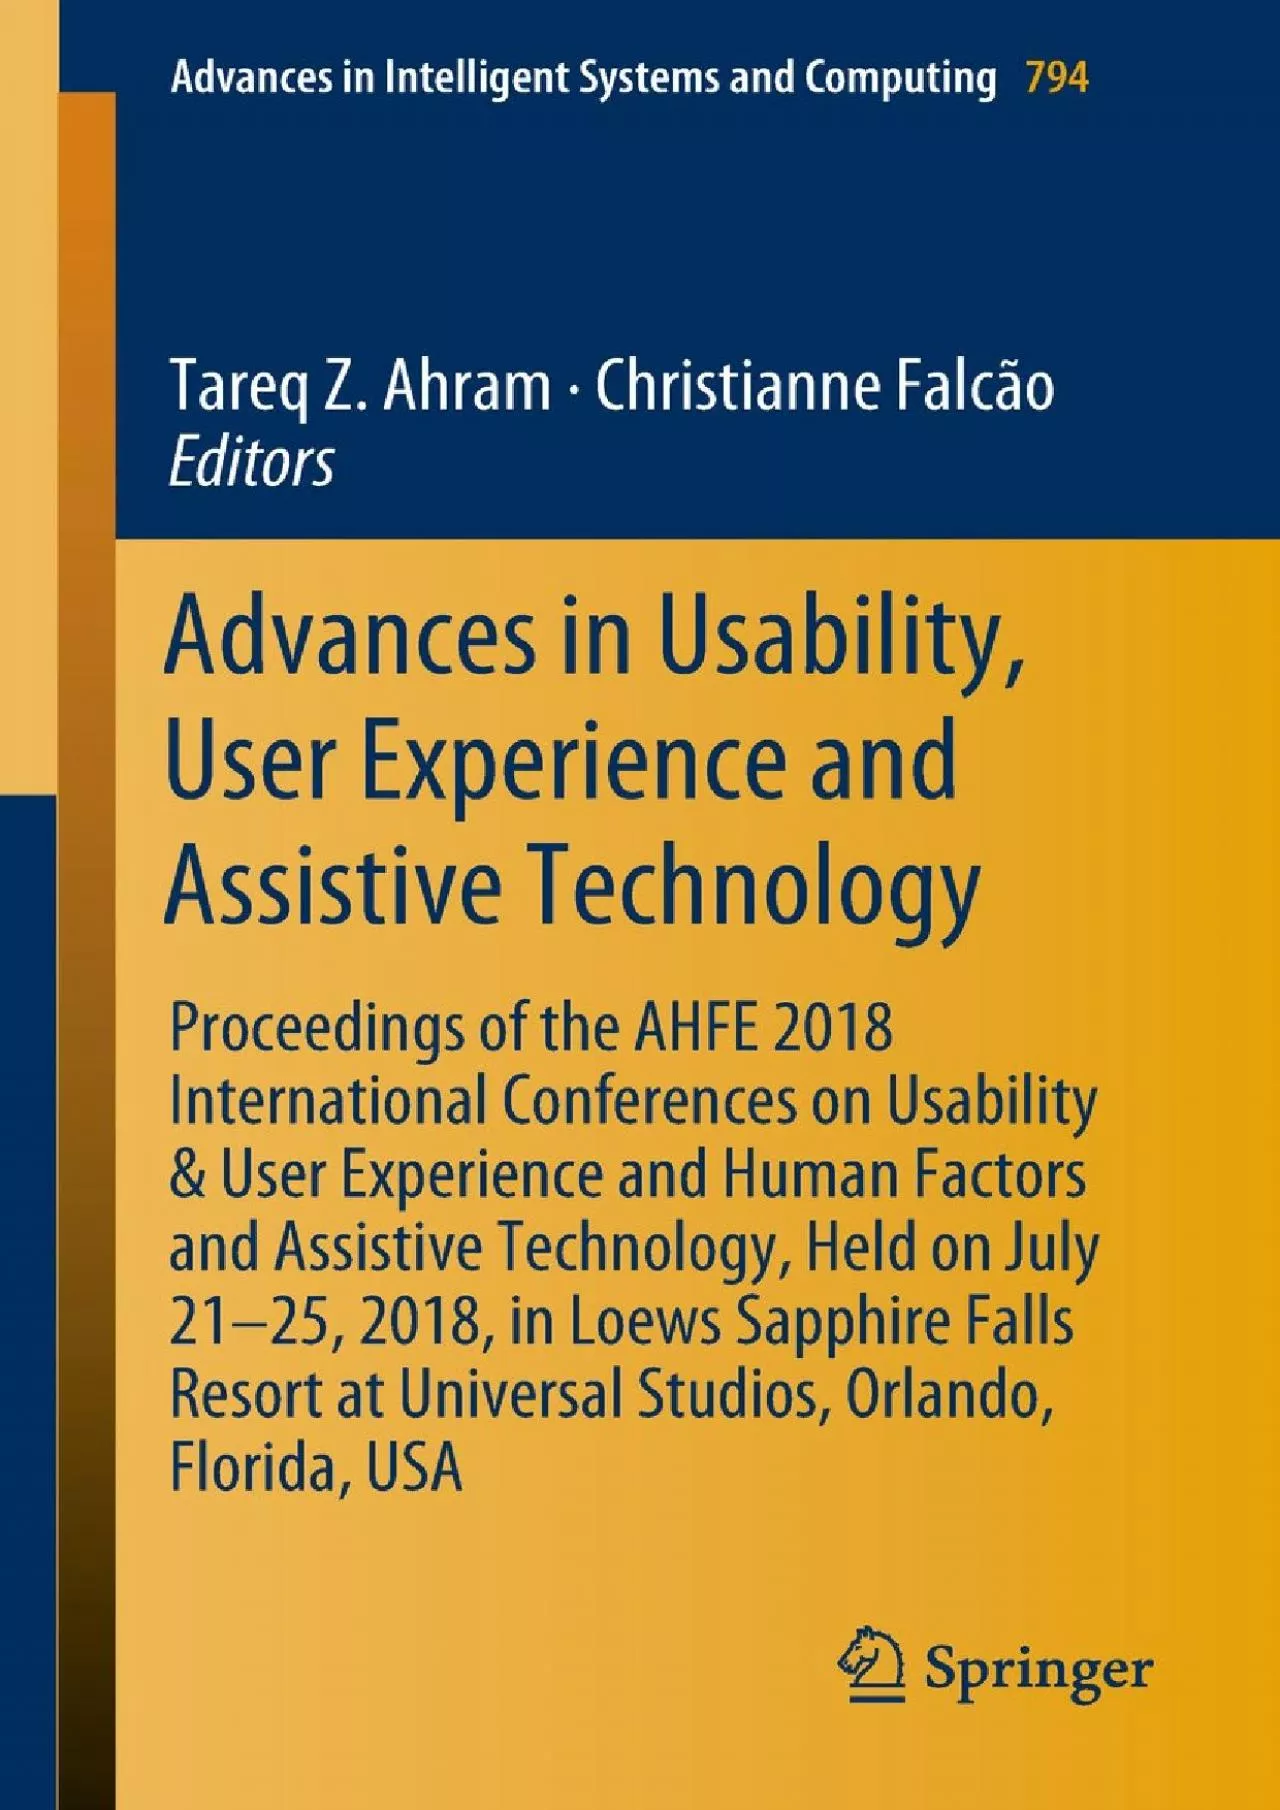 (DOWNLOAD)-Advances in Usability User Experience and Assistive Technology Proceedings